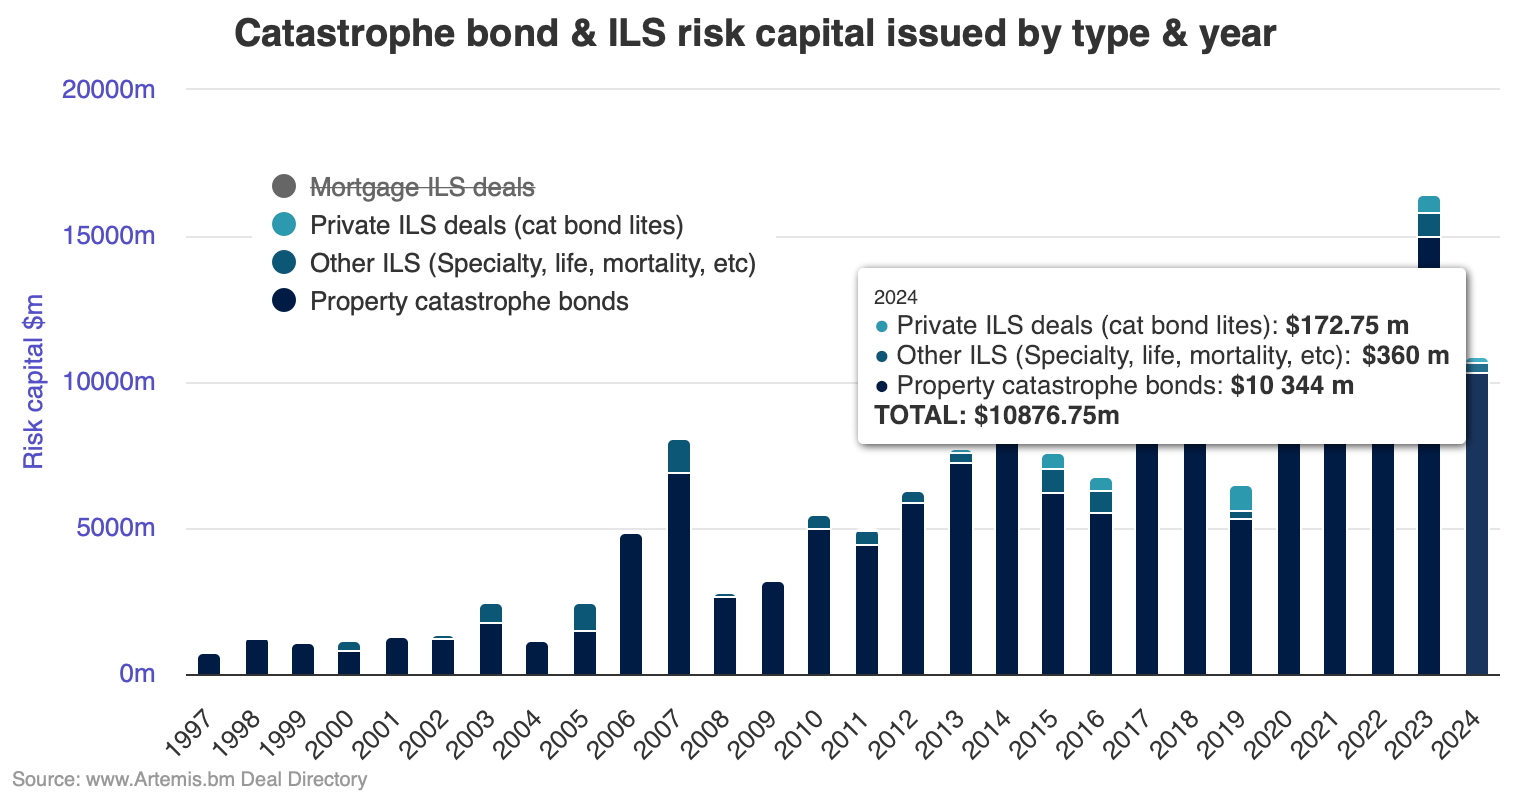 catastrophe-bond-issuance-by-year-type